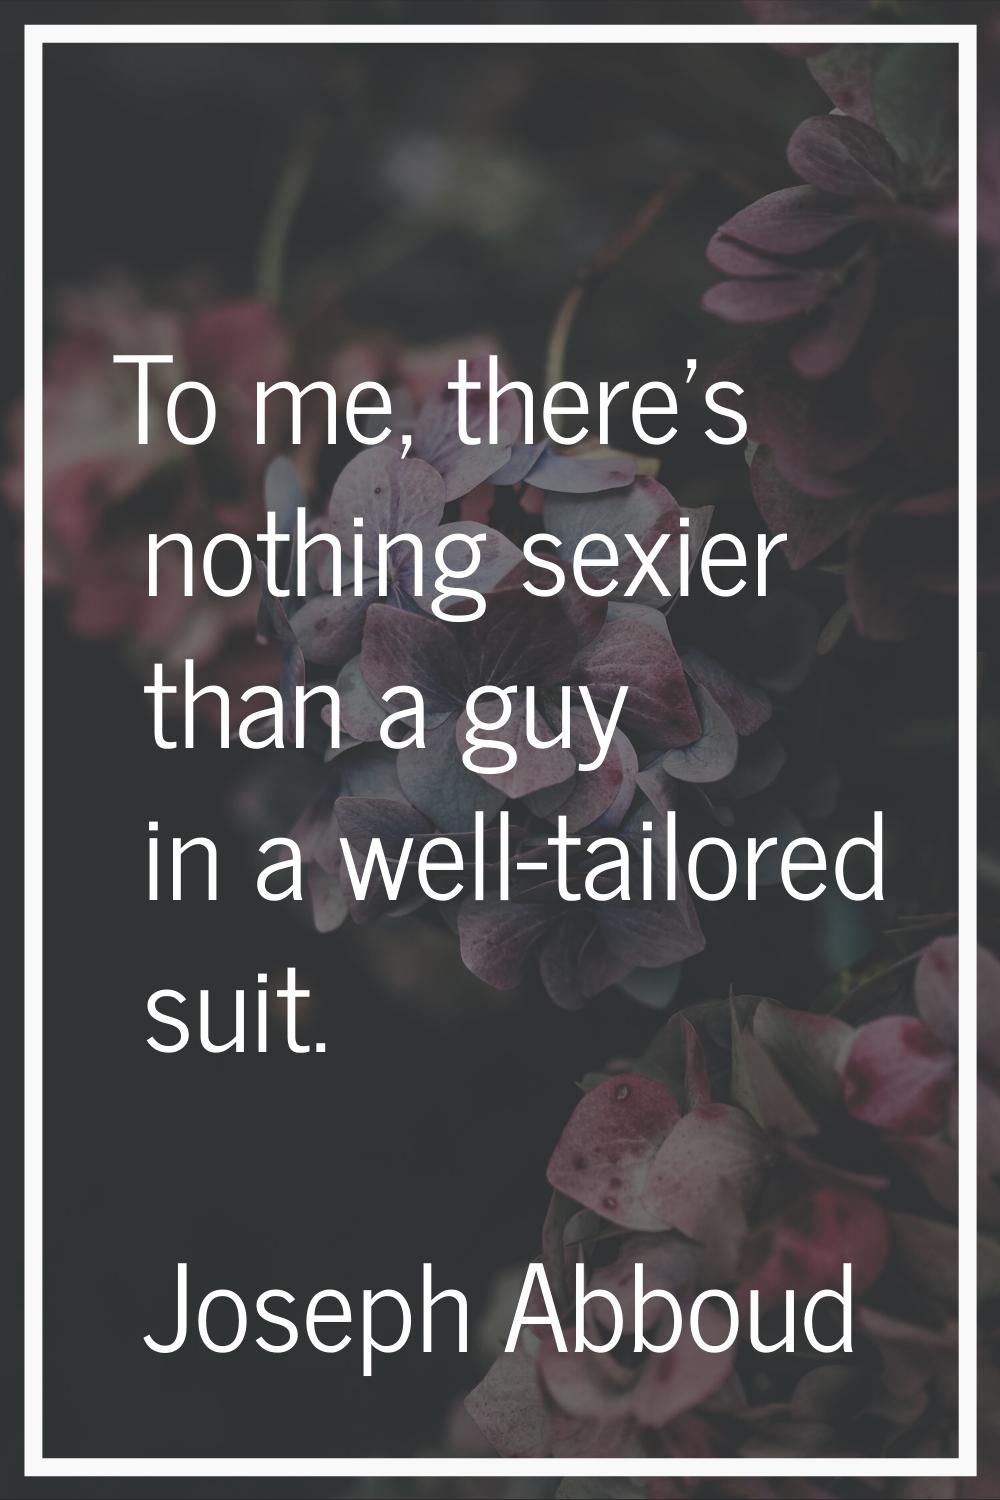 To me, there's nothing sexier than a guy in a well-tailored suit.